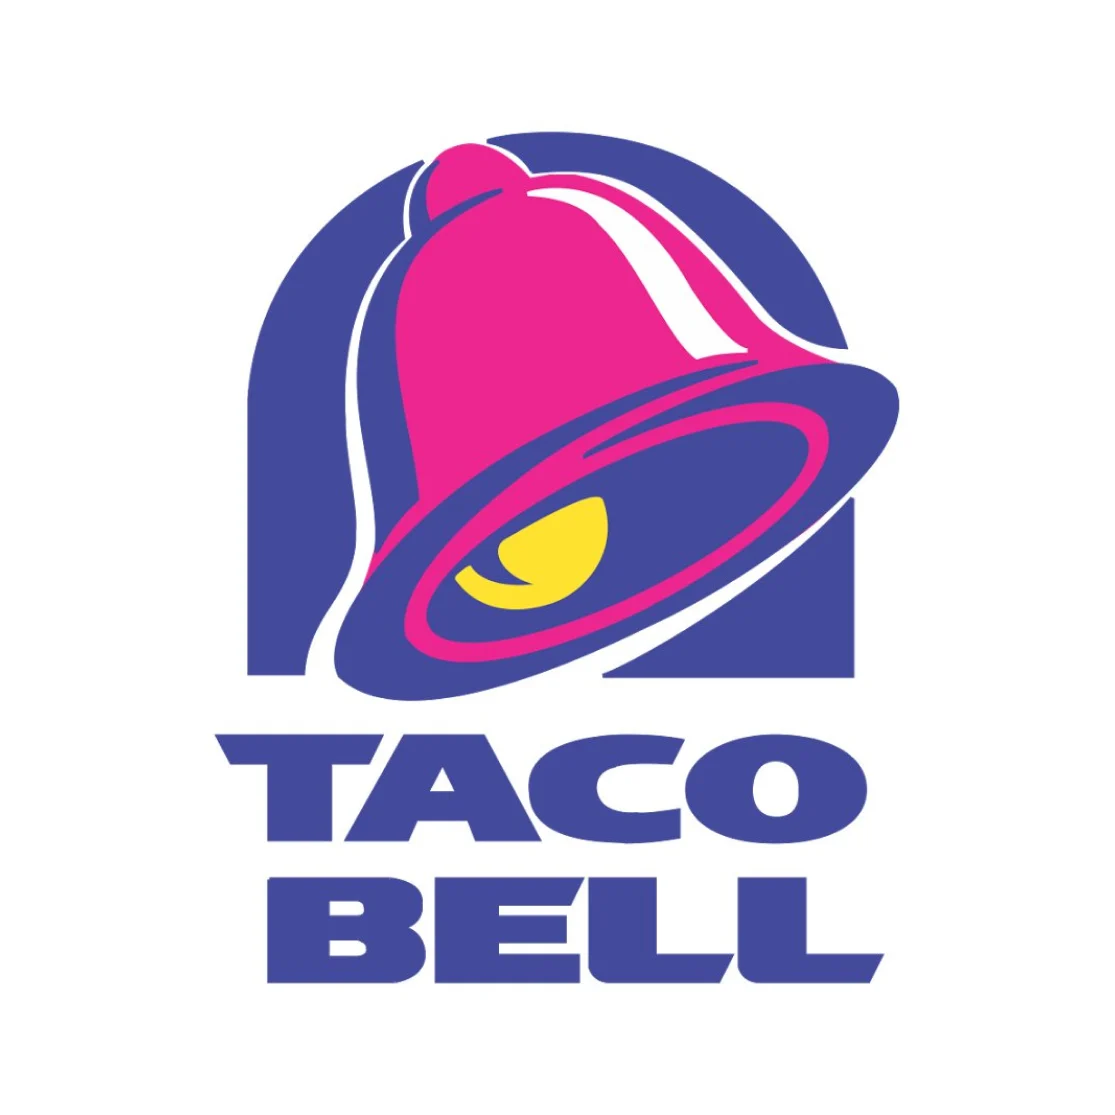 Tacobell.Com Offer! Save Up To 30% On The Items You Need